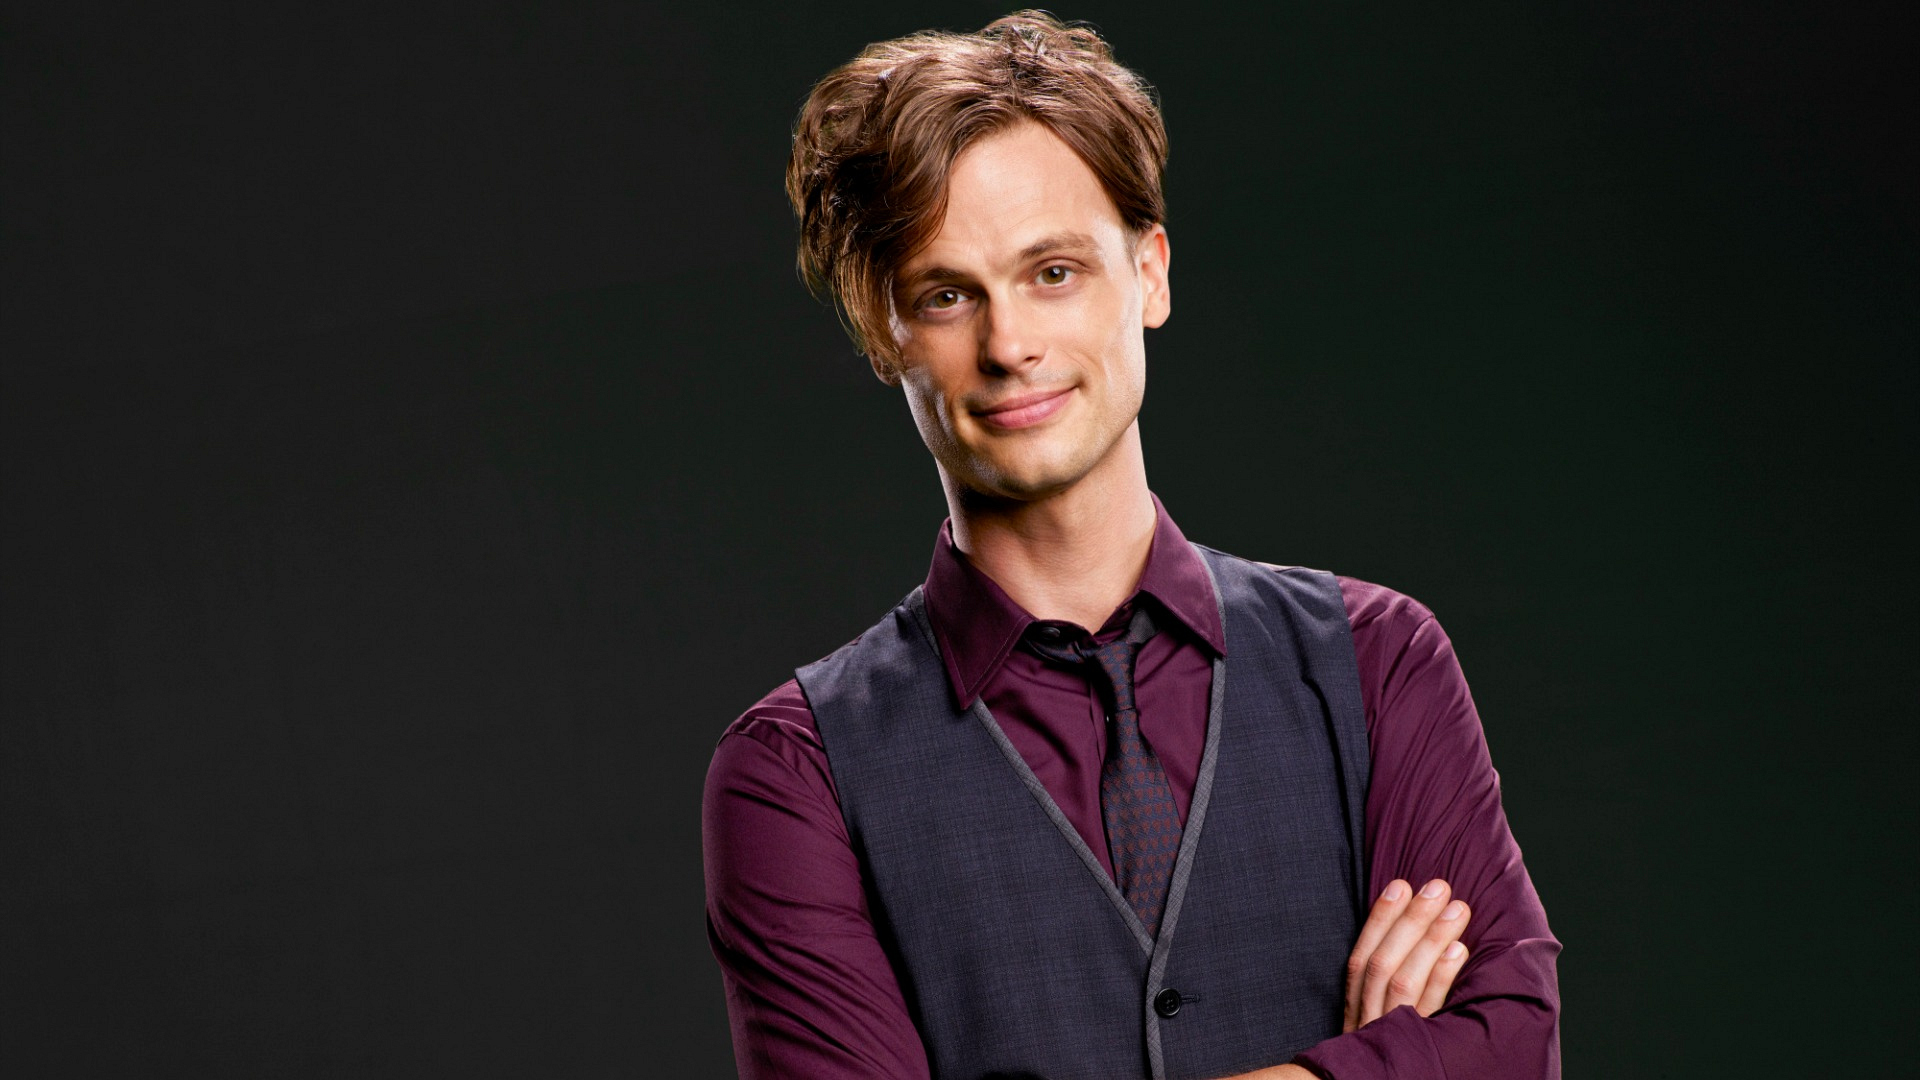 The Hairstyles Of Dr. Spencer Reid - Page 10 - Criminal Minds Photos - CBS.com